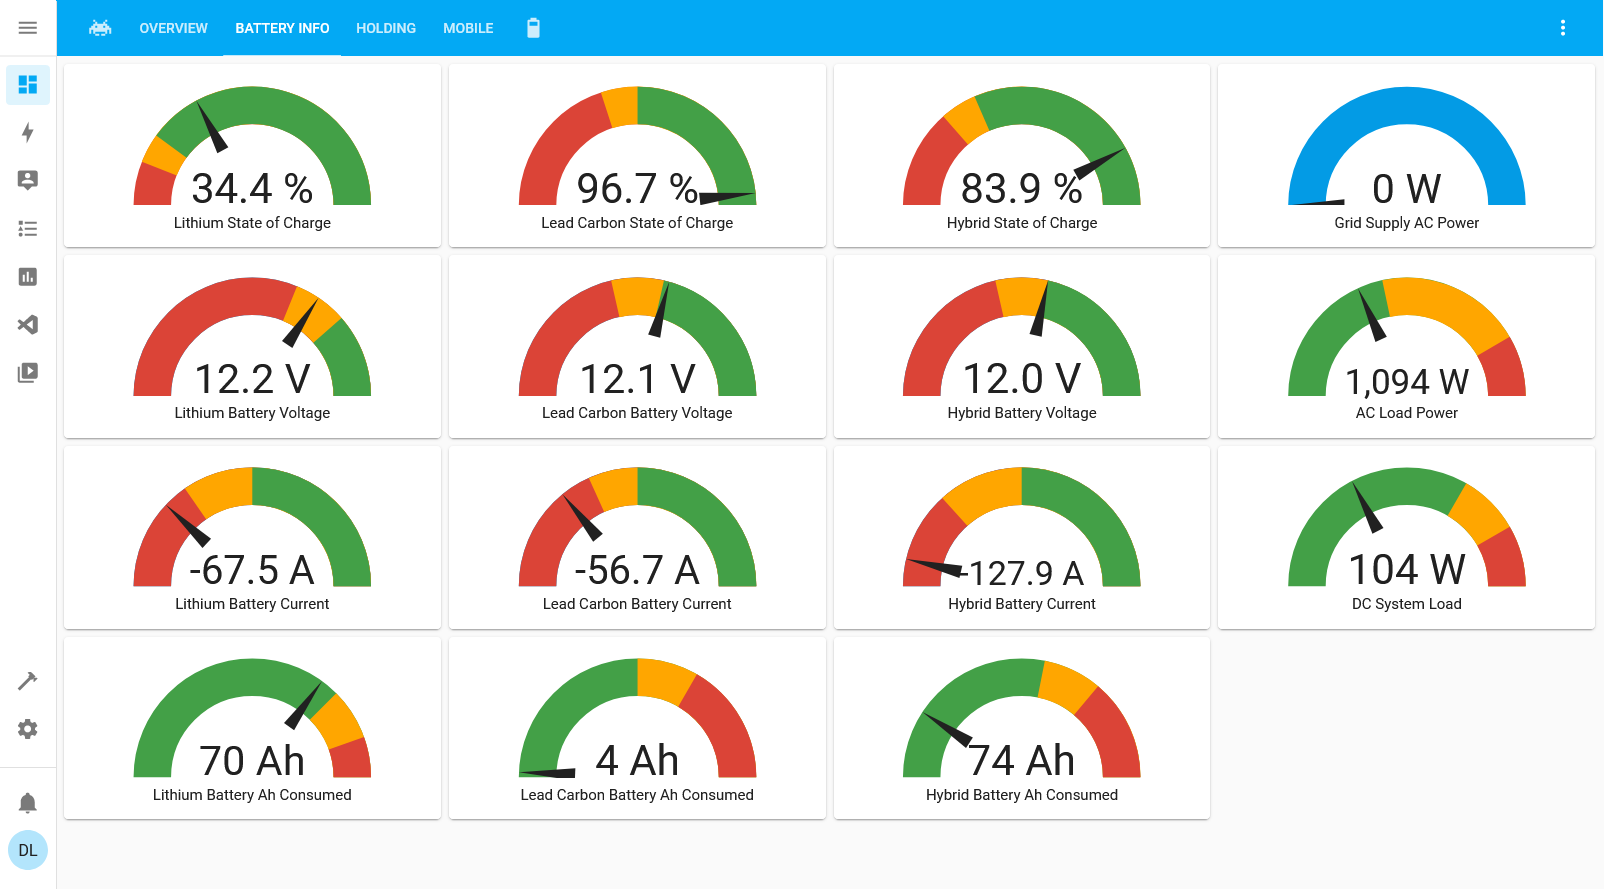 Screenshot 2021-12-20 at 13-44-05 Overview - Home Assistant.png